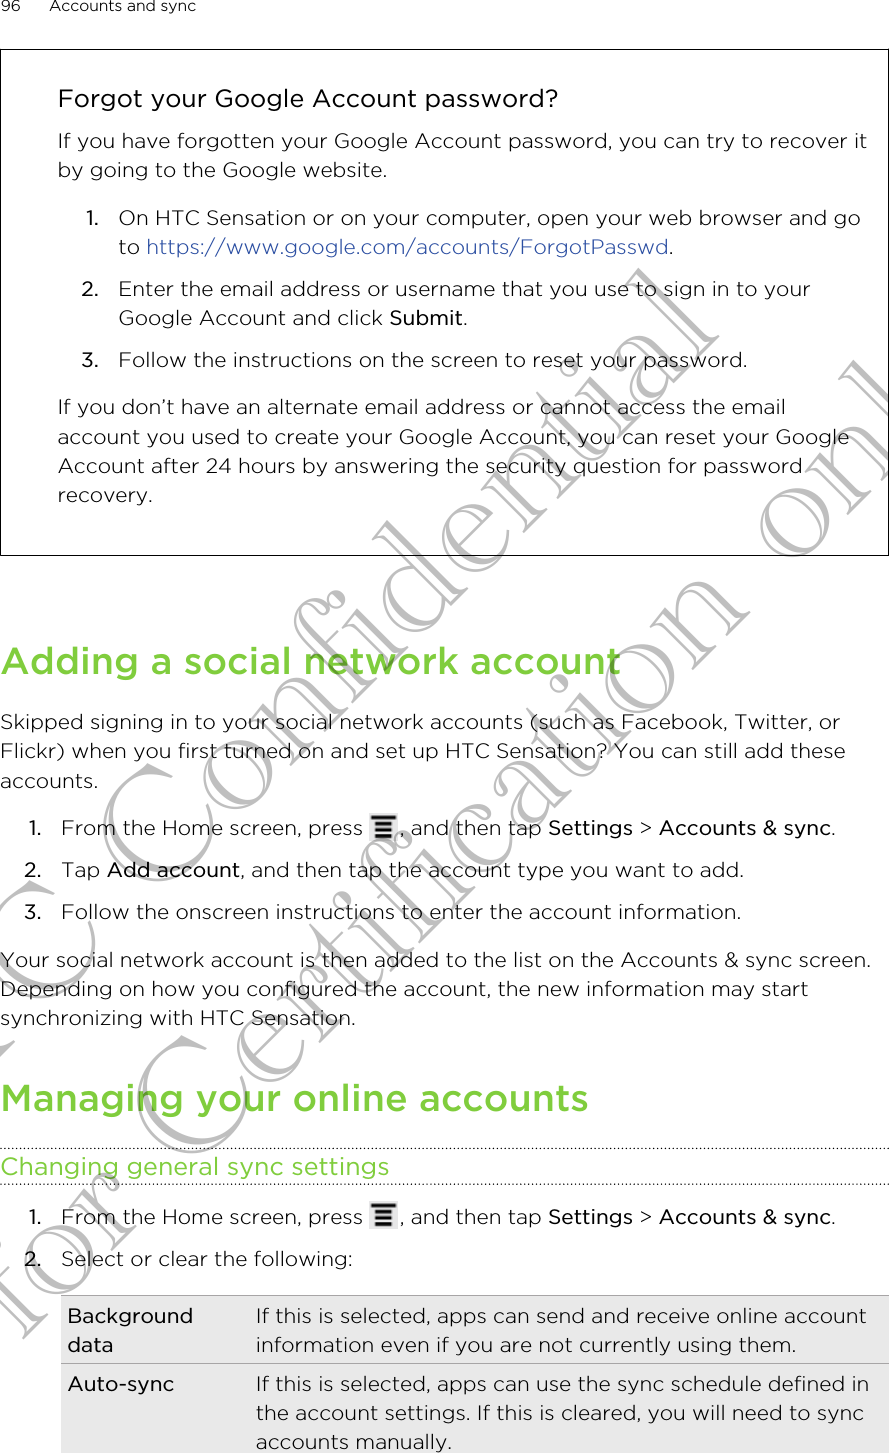 Forgot your Google Account password?If you have forgotten your Google Account password, you can try to recover itby going to the Google website.1. On HTC Sensation or on your computer, open your web browser and goto https://www.google.com/accounts/ForgotPasswd.2. Enter the email address or username that you use to sign in to yourGoogle Account and click Submit.3. Follow the instructions on the screen to reset your password.If you don’t have an alternate email address or cannot access the emailaccount you used to create your Google Account, you can reset your GoogleAccount after 24 hours by answering the security question for passwordrecovery.Adding a social network accountSkipped signing in to your social network accounts (such as Facebook, Twitter, orFlickr) when you first turned on and set up HTC Sensation? You can still add theseaccounts.1. From the Home screen, press  , and then tap Settings &gt; Accounts &amp; sync.2. Tap Add account, and then tap the account type you want to add.3. Follow the onscreen instructions to enter the account information.Your social network account is then added to the list on the Accounts &amp; sync screen.Depending on how you configured the account, the new information may startsynchronizing with HTC Sensation.Managing your online accountsChanging general sync settings1. From the Home screen, press  , and then tap Settings &gt; Accounts &amp; sync.2. Select or clear the following:BackgrounddataIf this is selected, apps can send and receive online accountinformation even if you are not currently using them.Auto-sync If this is selected, apps can use the sync schedule defined inthe account settings. If this is cleared, you will need to syncaccounts manually.96 Accounts and syncHTC Confidential for Certification only